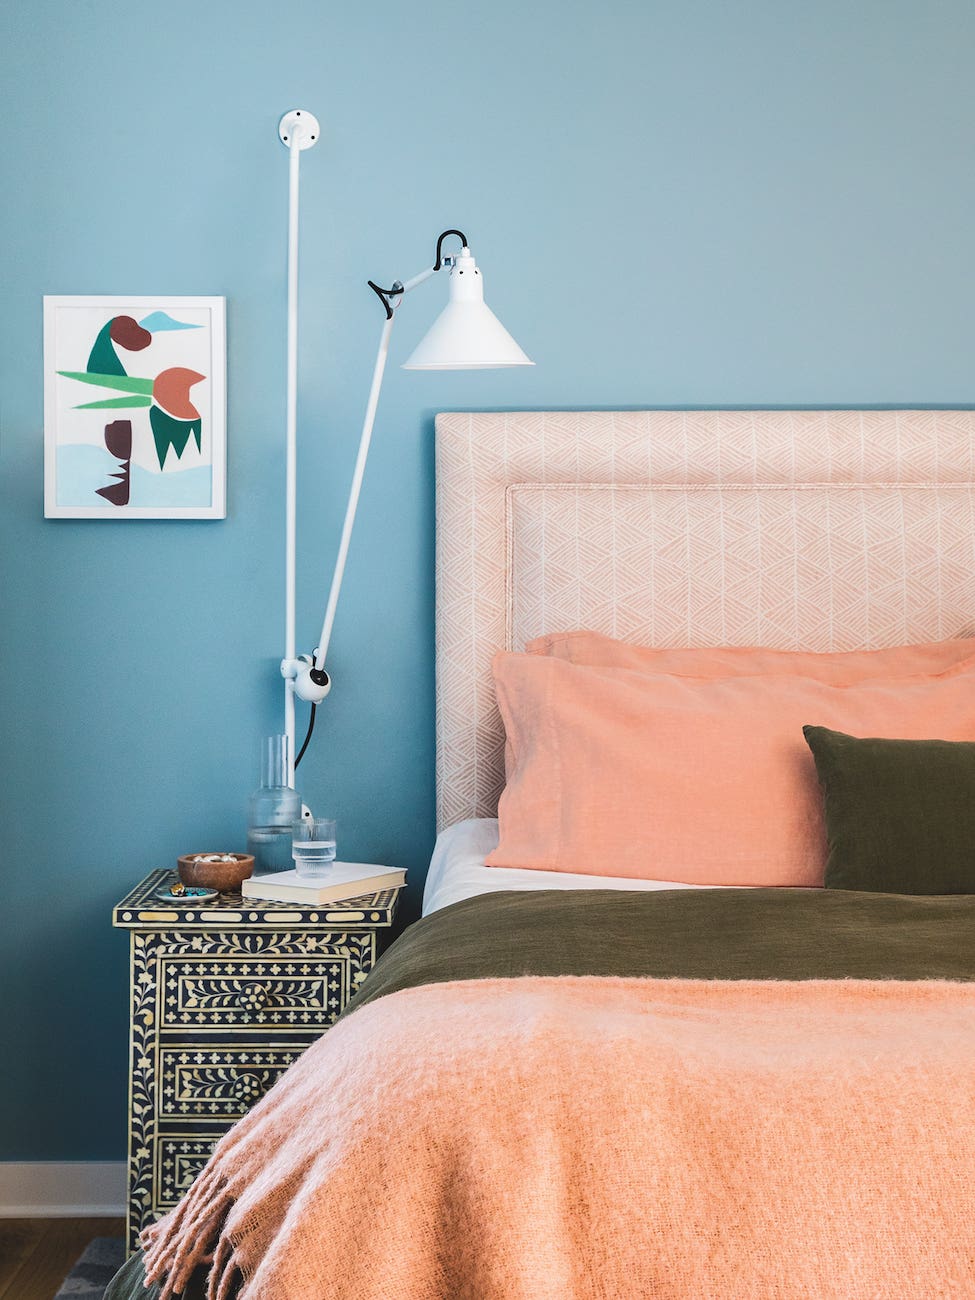 Bedroom with blue walls and peach sheets